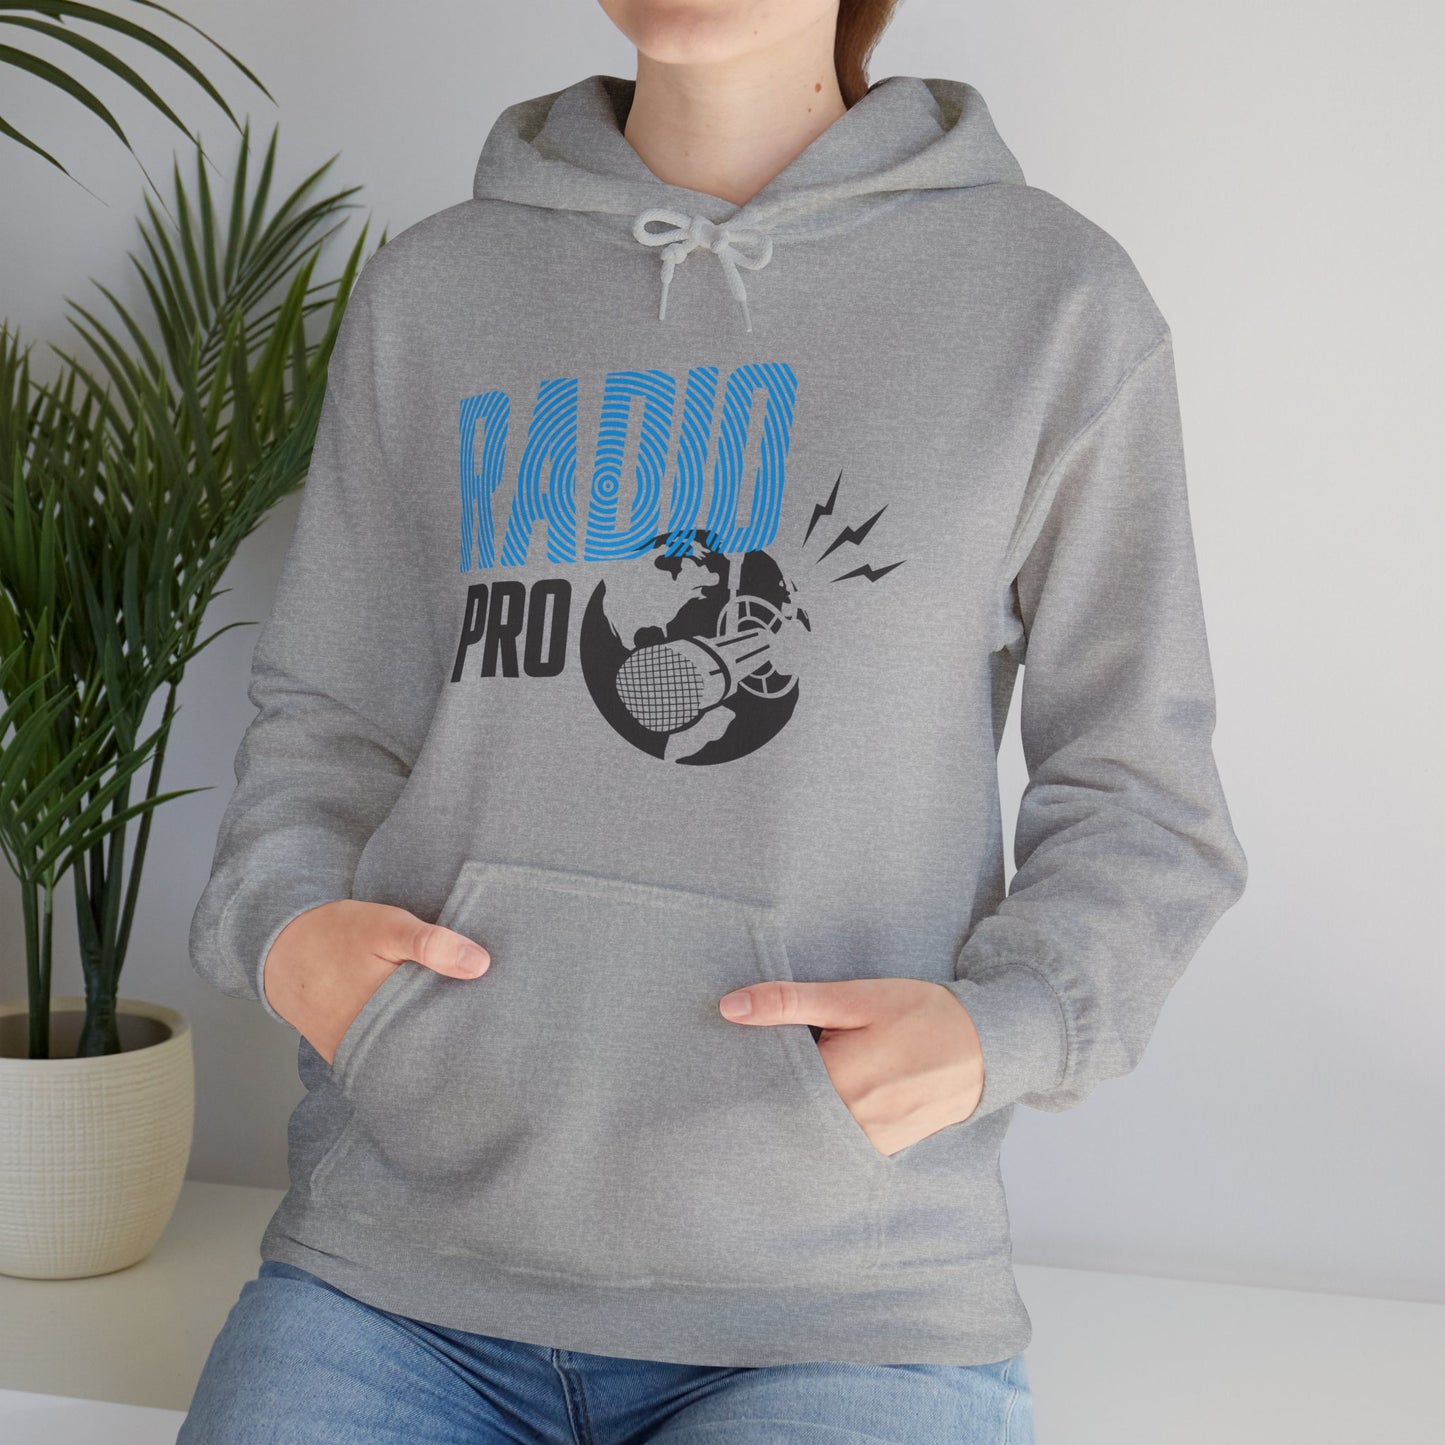 Radio T-Shirt for Radio DJs and Music Industry pros